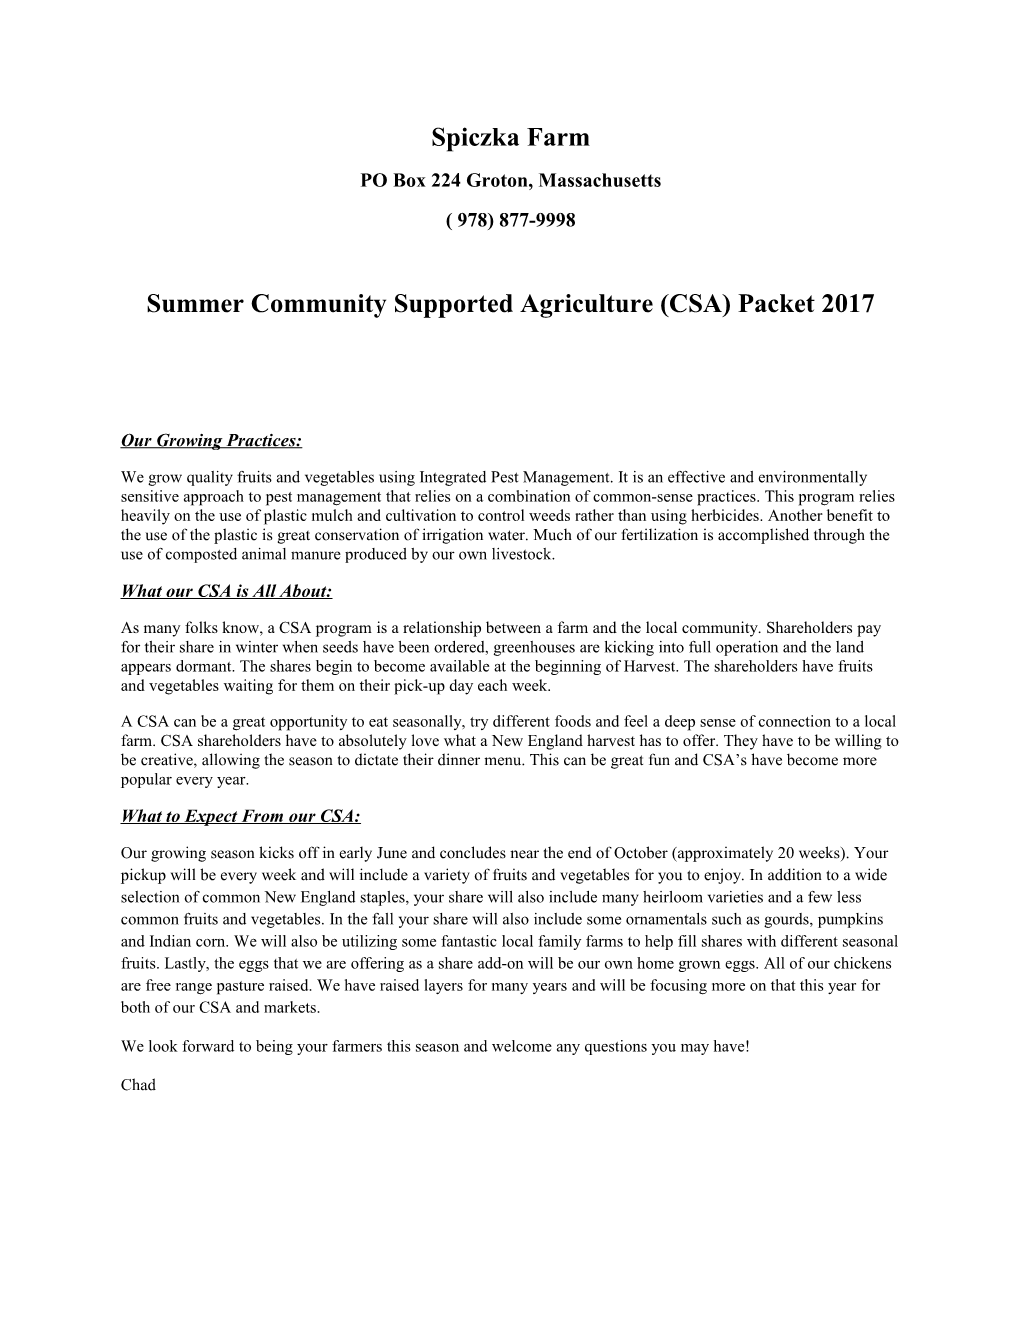 Summer Community Supported Agriculture (CSA) Packet 2017